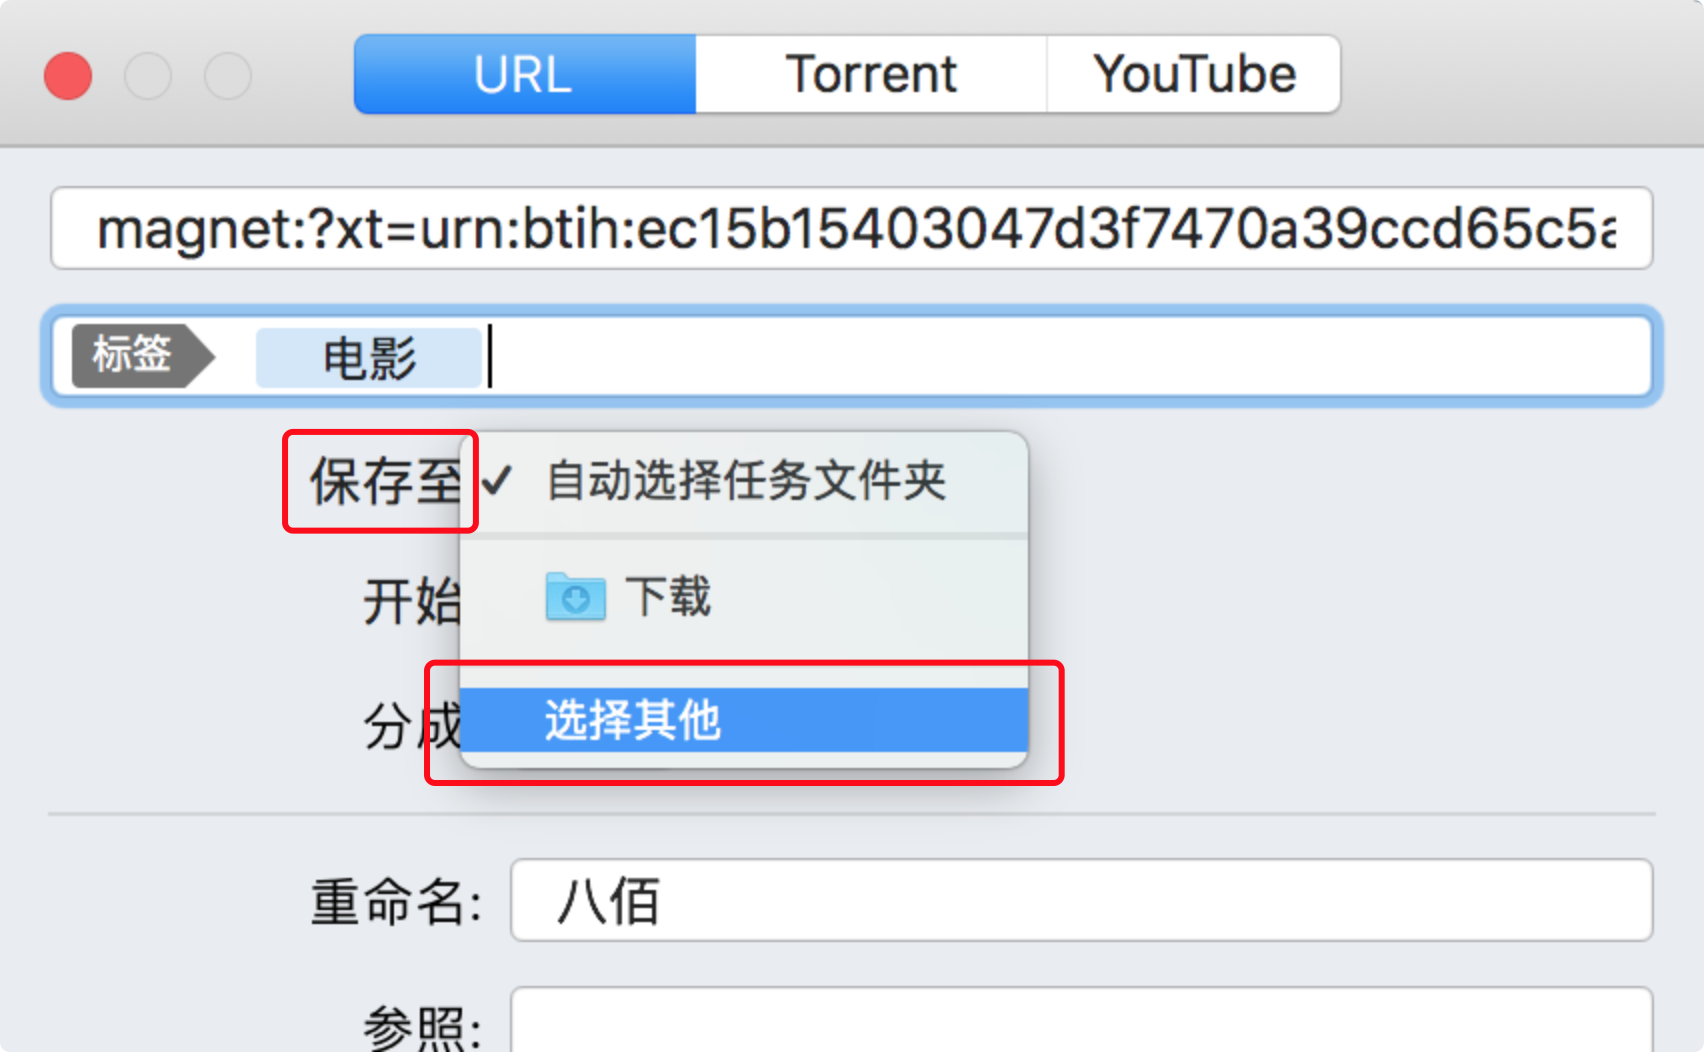 ../Library/Containers/com.tencent.qq/Data/Library/Caches/Images/5826EF6D8B1CA210193443D8620A662B.png